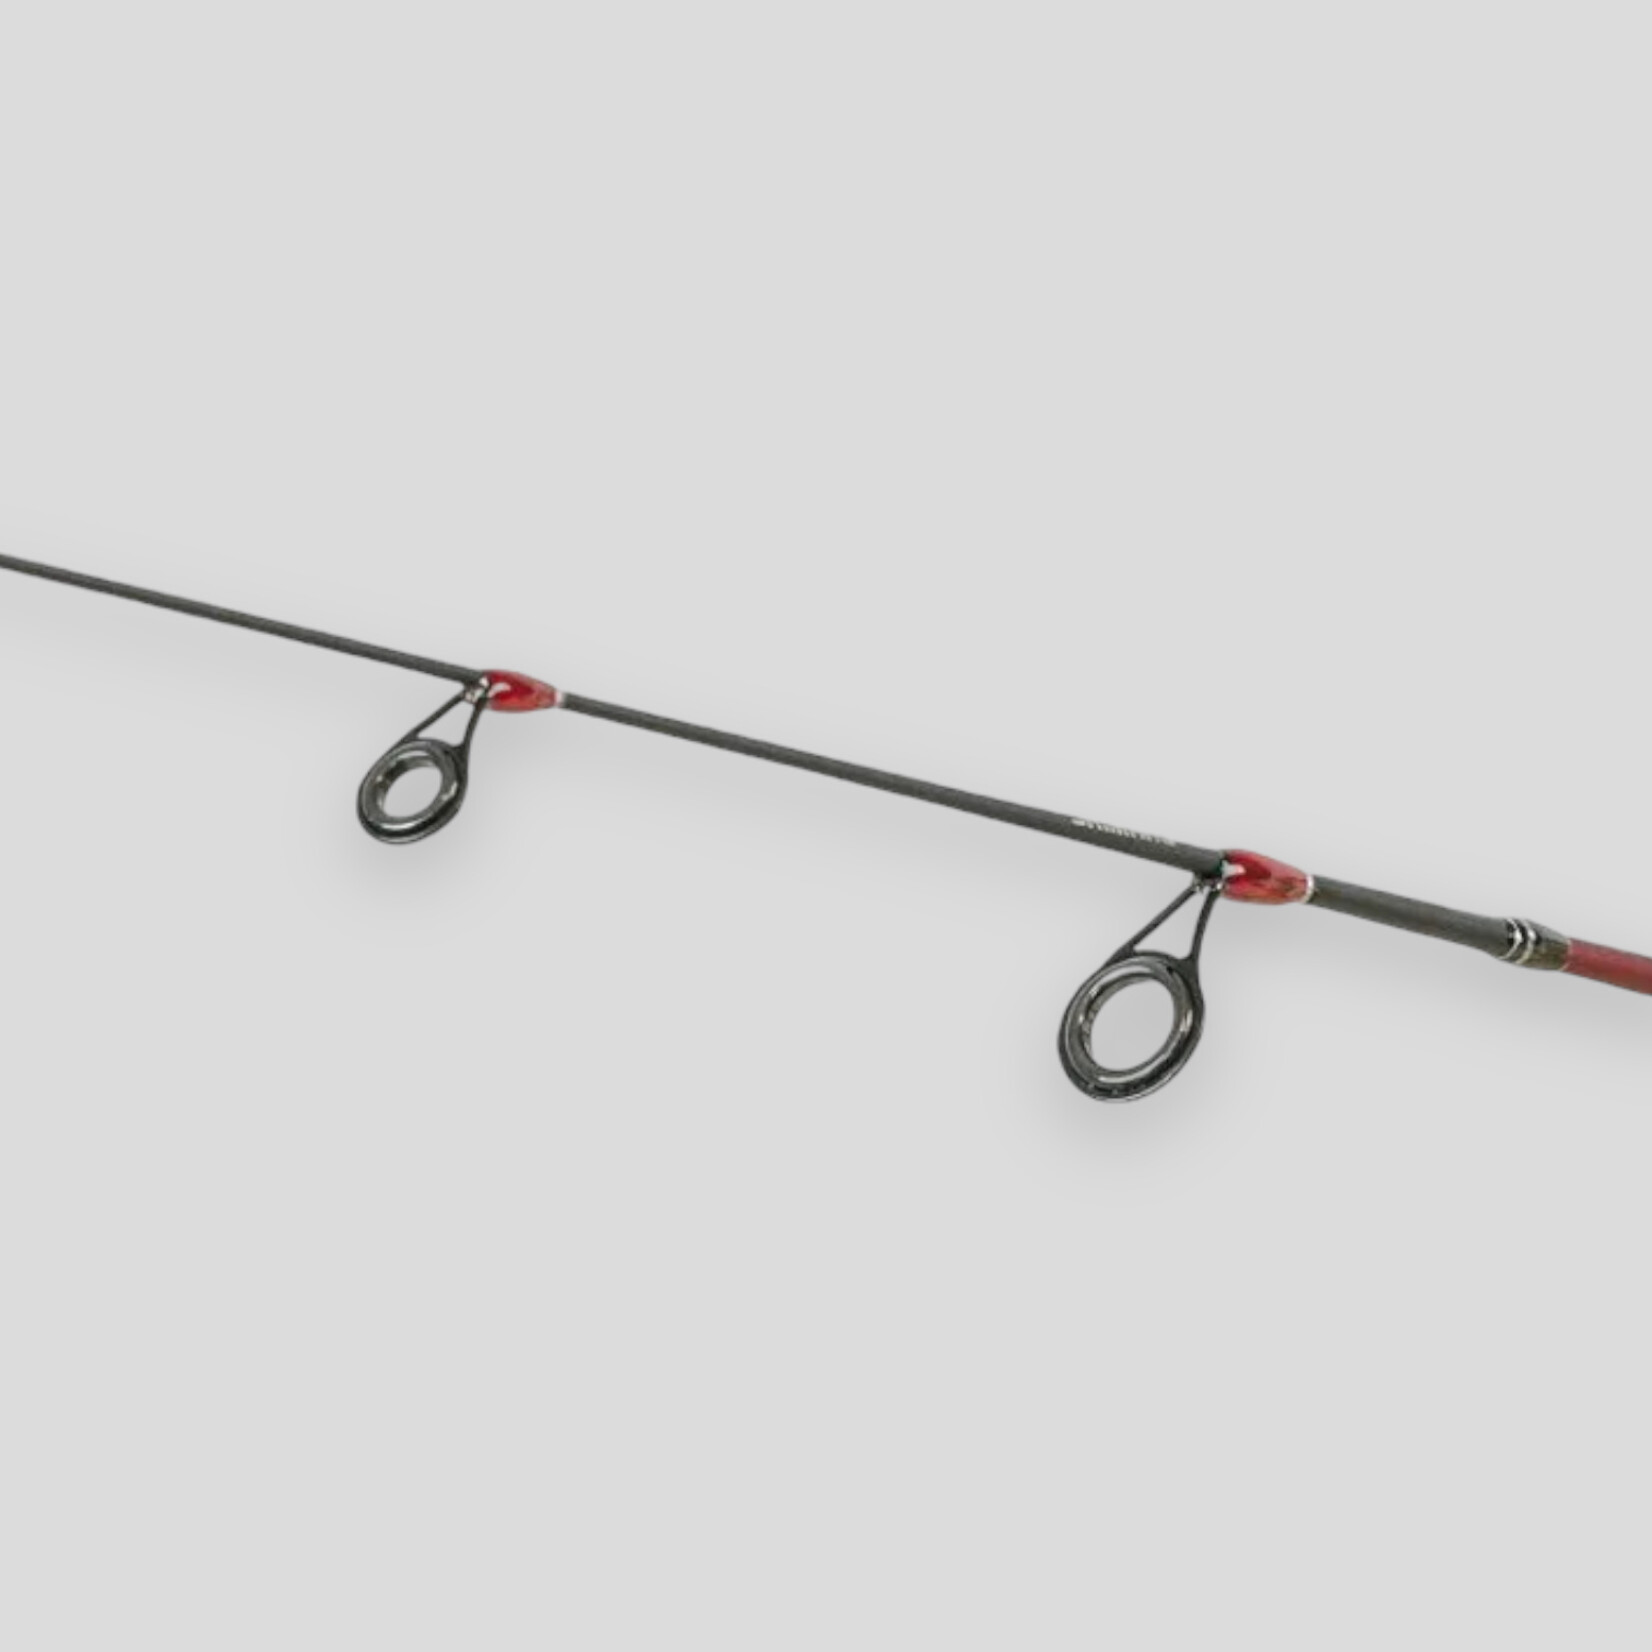 The Estuary Combo Shimano Sienna Spinning Fishing Combo is our store’s  newly launched 2021 product on Cheap Shimano Store